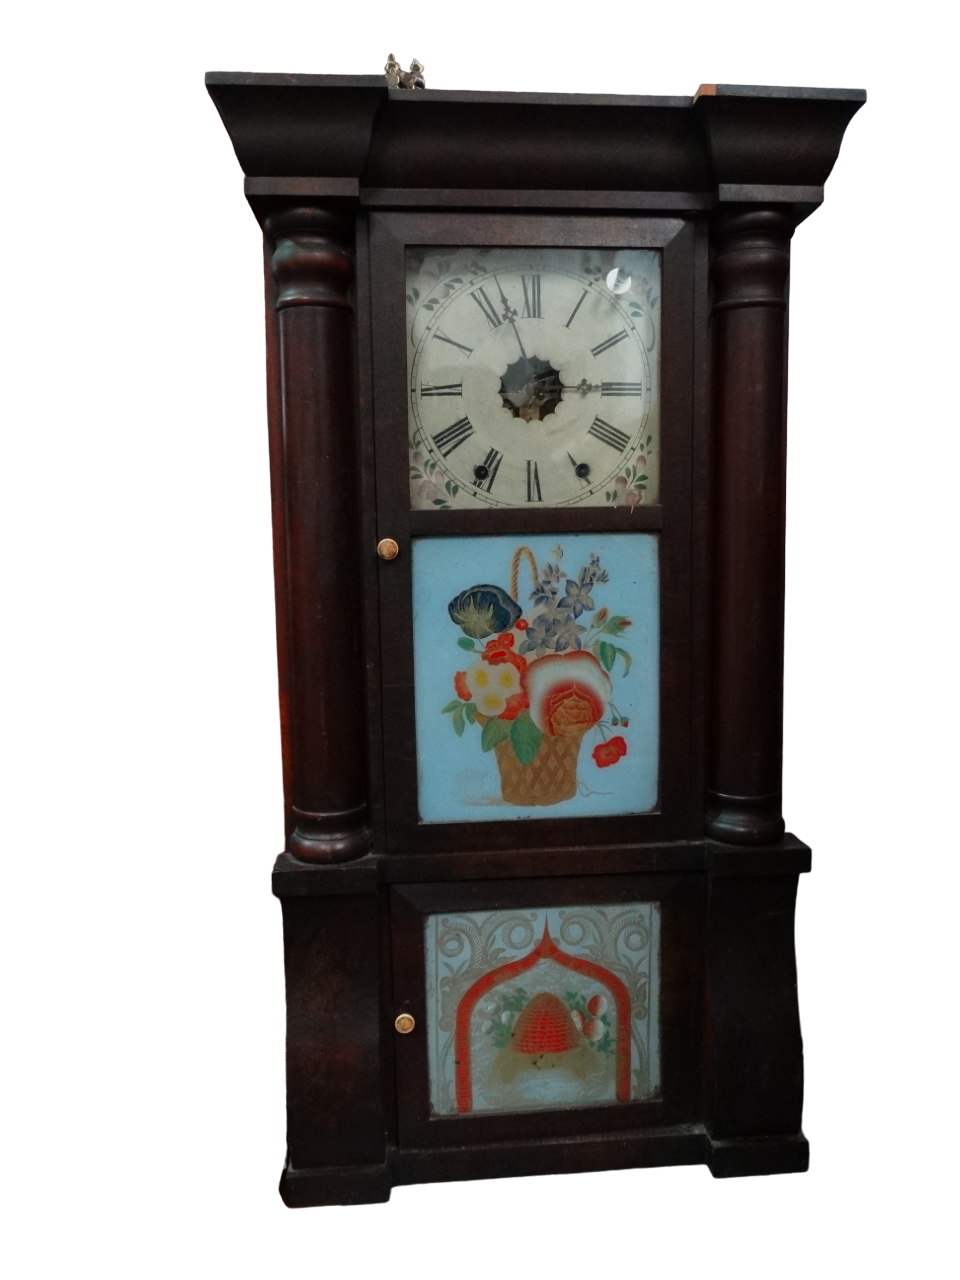 A late 19th century American wall clock - the cream painted dial set out with Roman numerals above